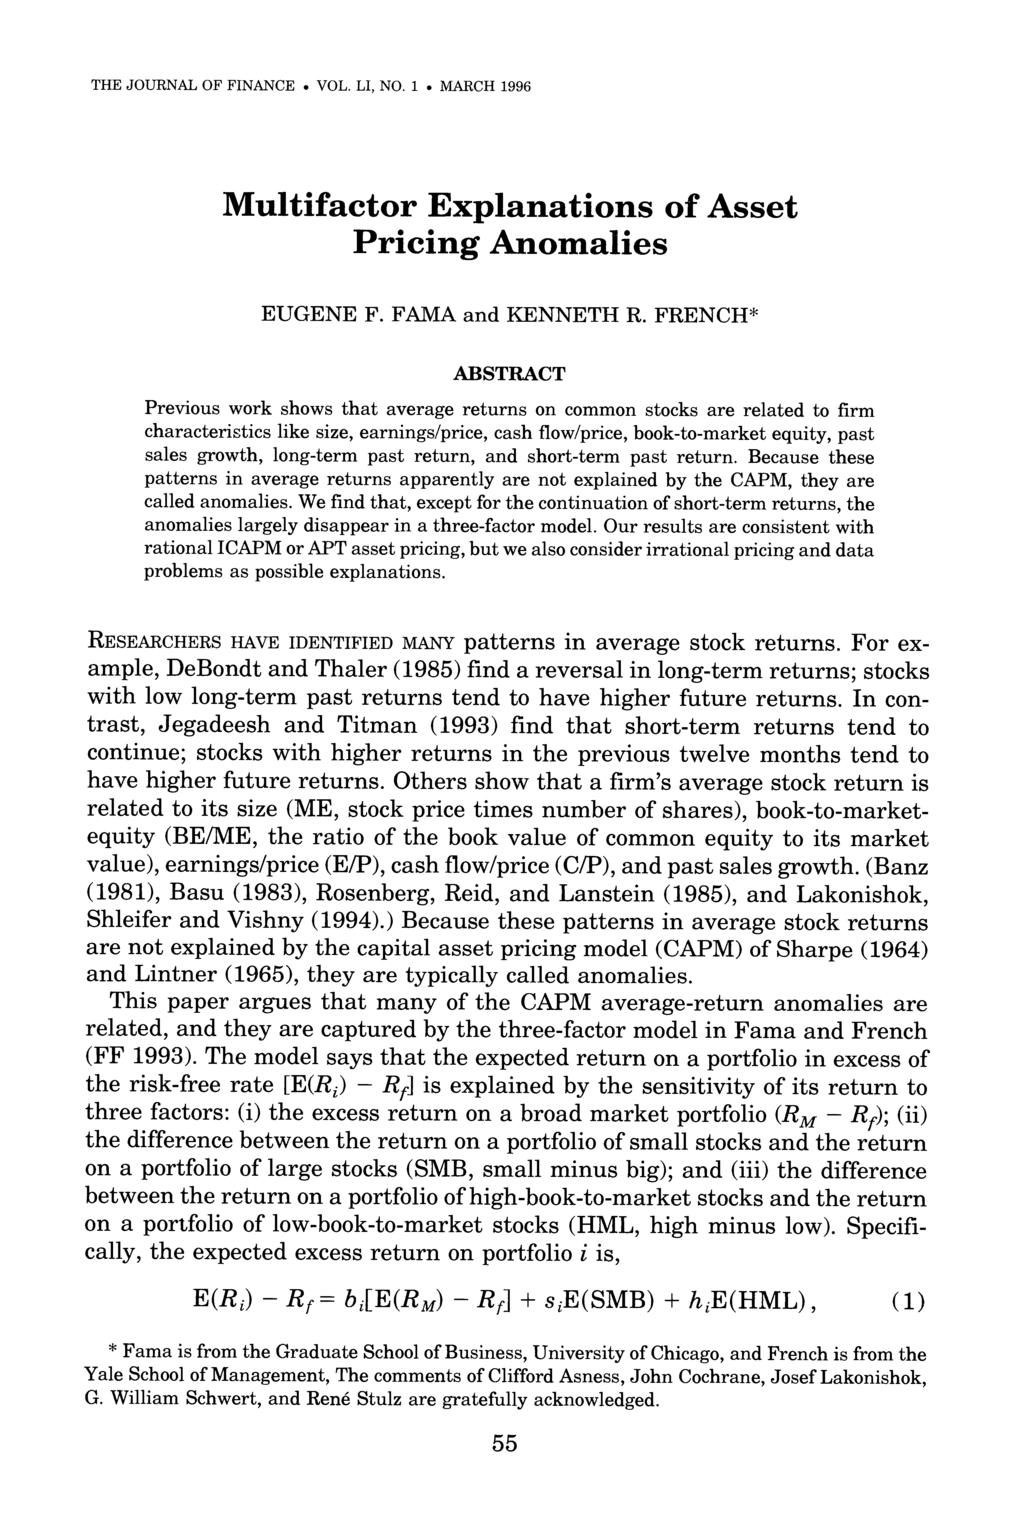 THE JOURNAL OF FINANCE. VOL. LI, NO. 1 * MARCH 1996 Multifactor Explanations of Asset Pricing Anomalies EUGENE F. FAMA and KENNETH R.